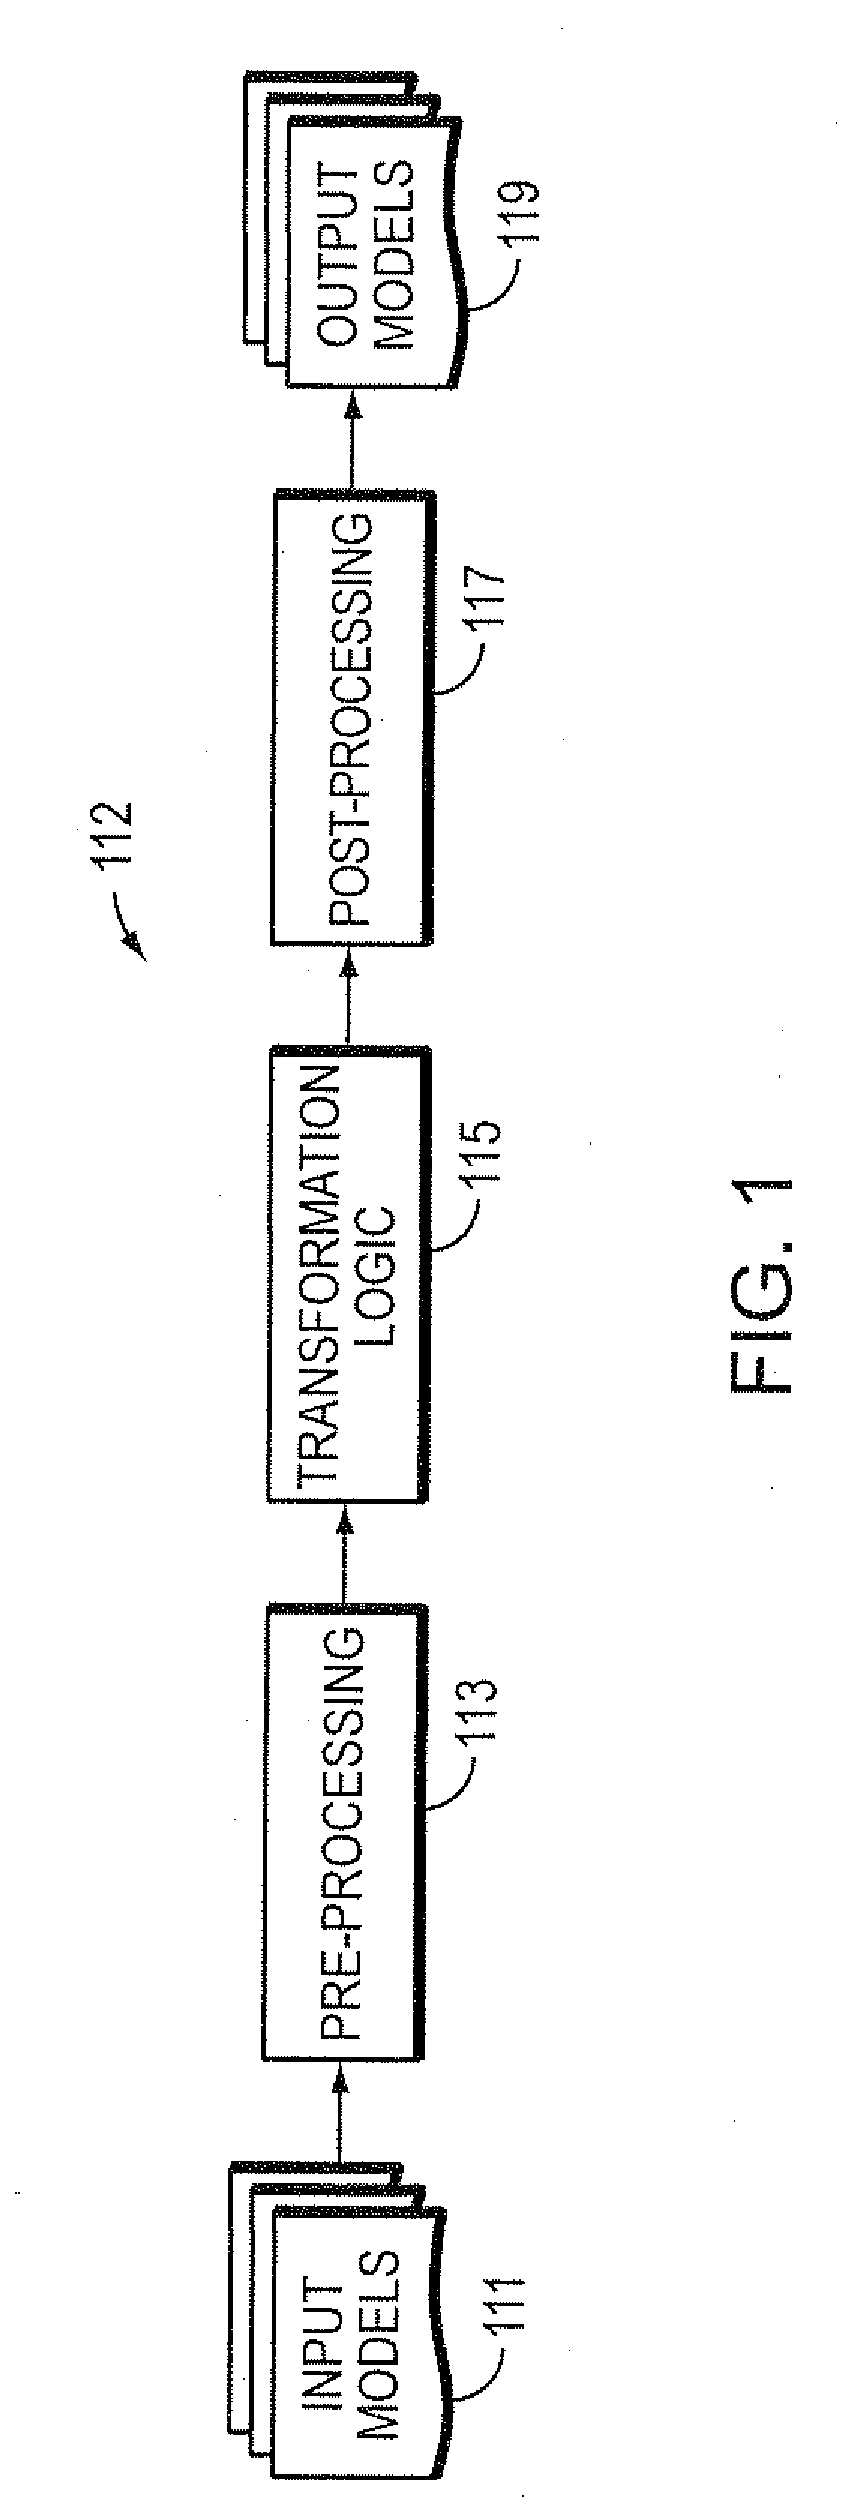 Computer Method and Apparatus for Chaining of Model-To-Model Transformations